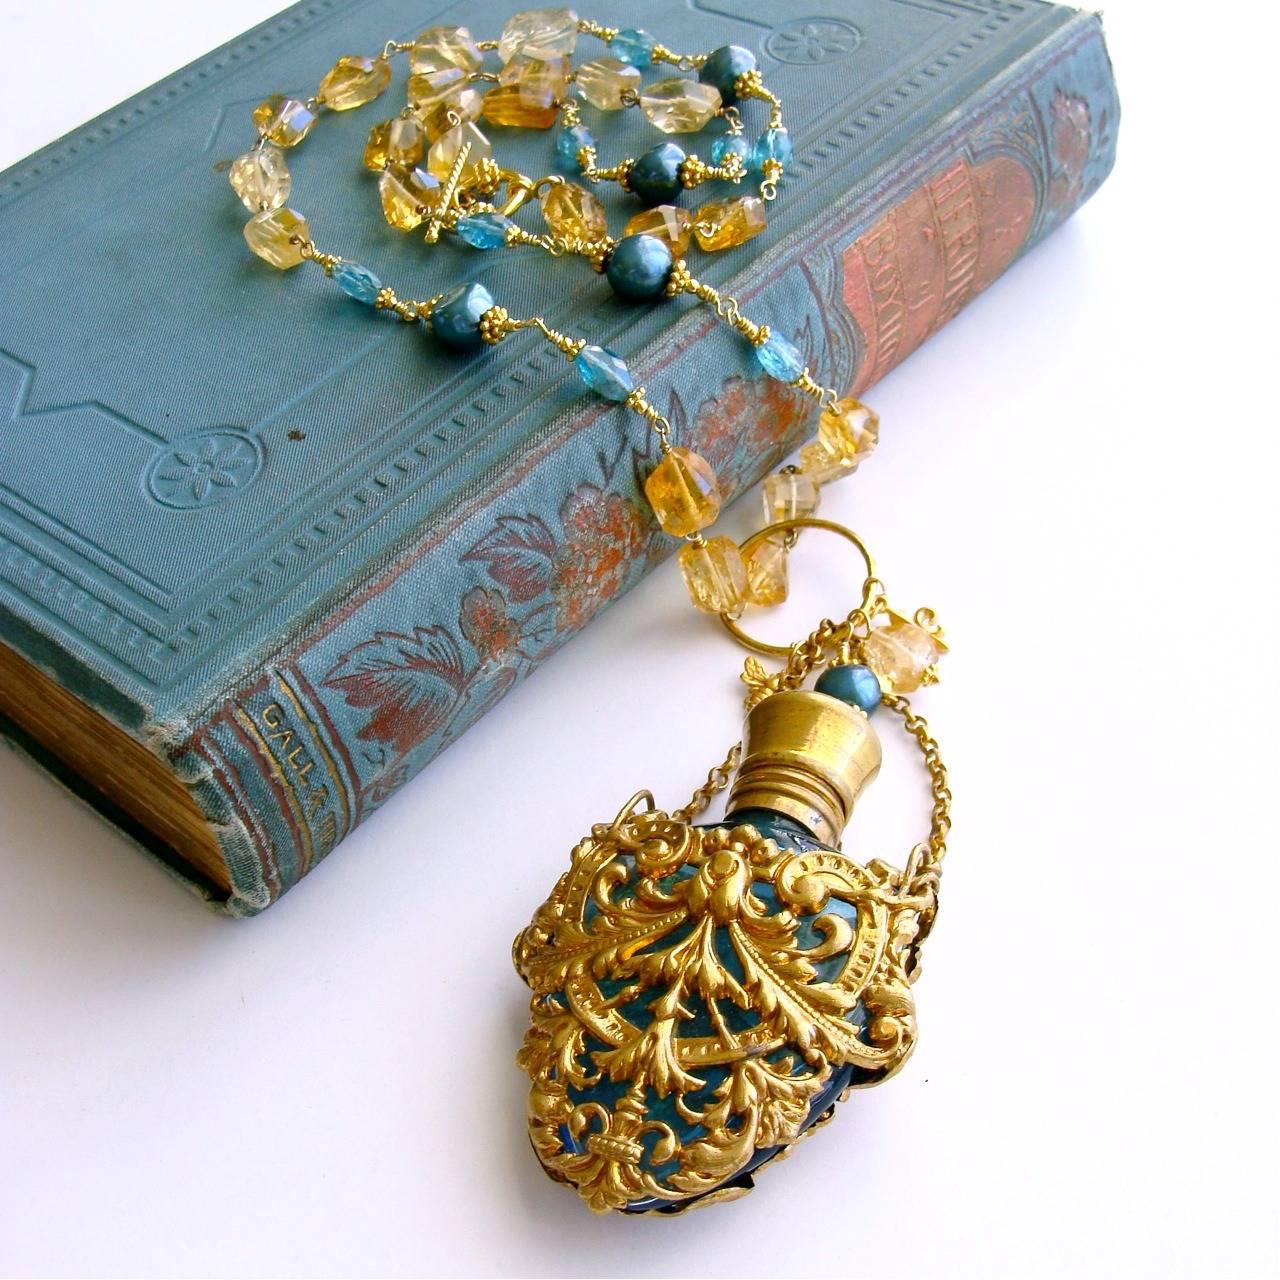 Rosalie Necklace.

The history of perfume during the Regency and Victorian Eras is a fascinating subject and this delicate necklace pays homage to the creativity and workmanship of that time.

A Victorian teal scent bottle (c. 1900) encased with